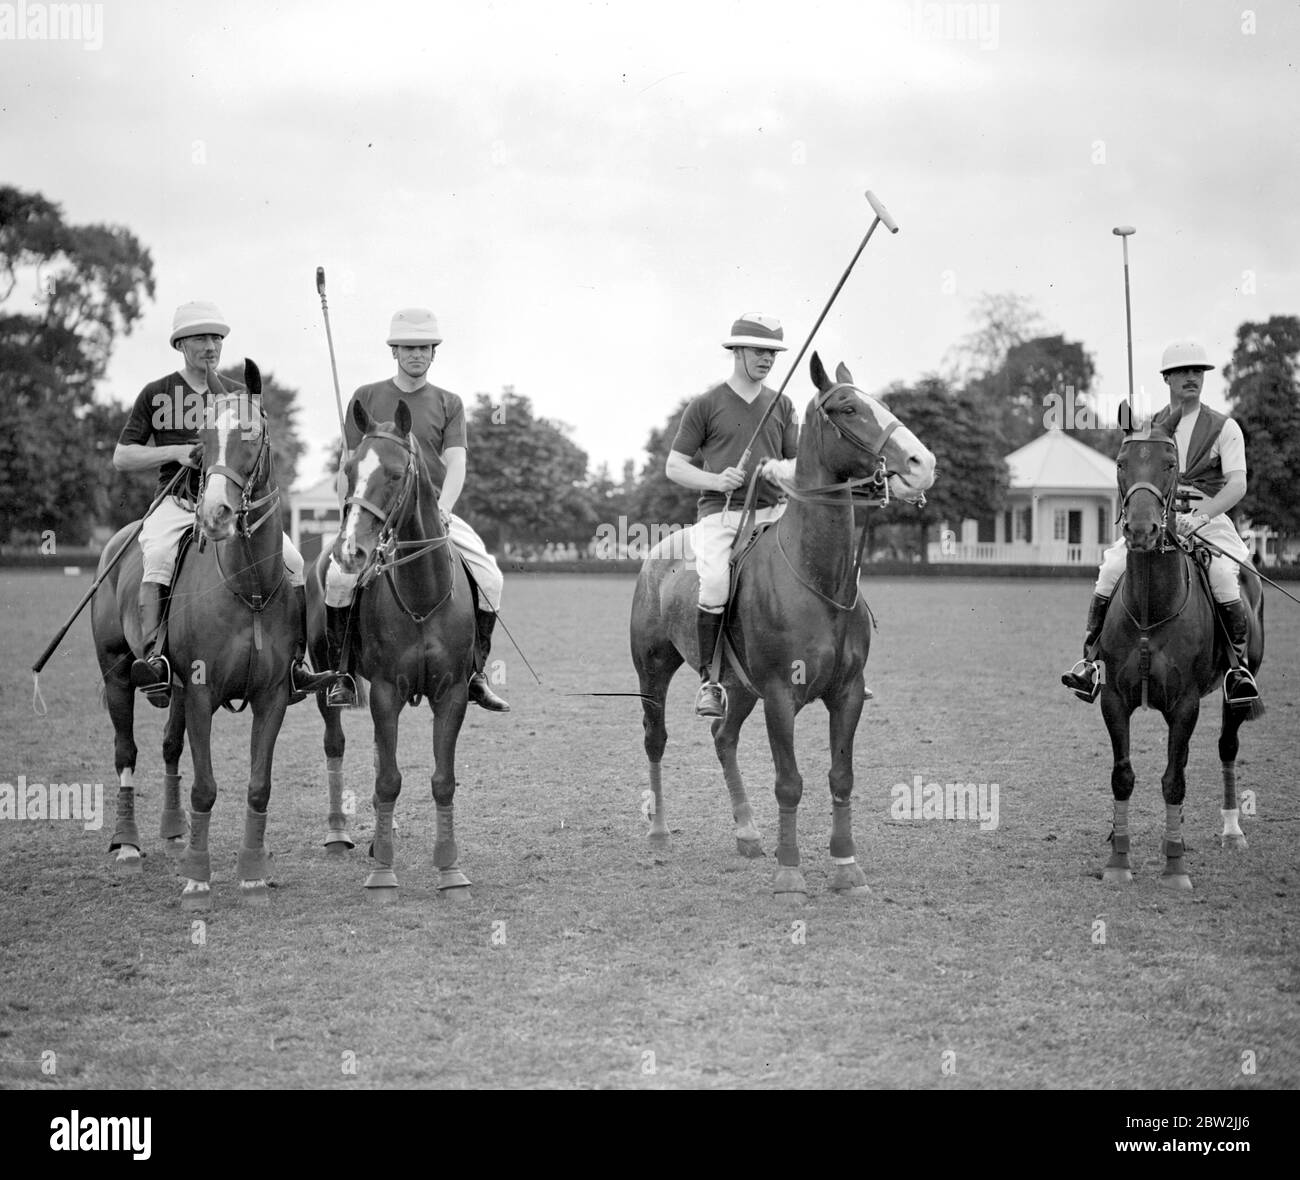 Ranelagh Polo - Lords V Commons. House of Commons Team:- Hon F.E. Gast, Sir A. Sinclair, Herr G.R.D. Shaw und Lord Apsley. 18 Juni 1927 Stockfoto